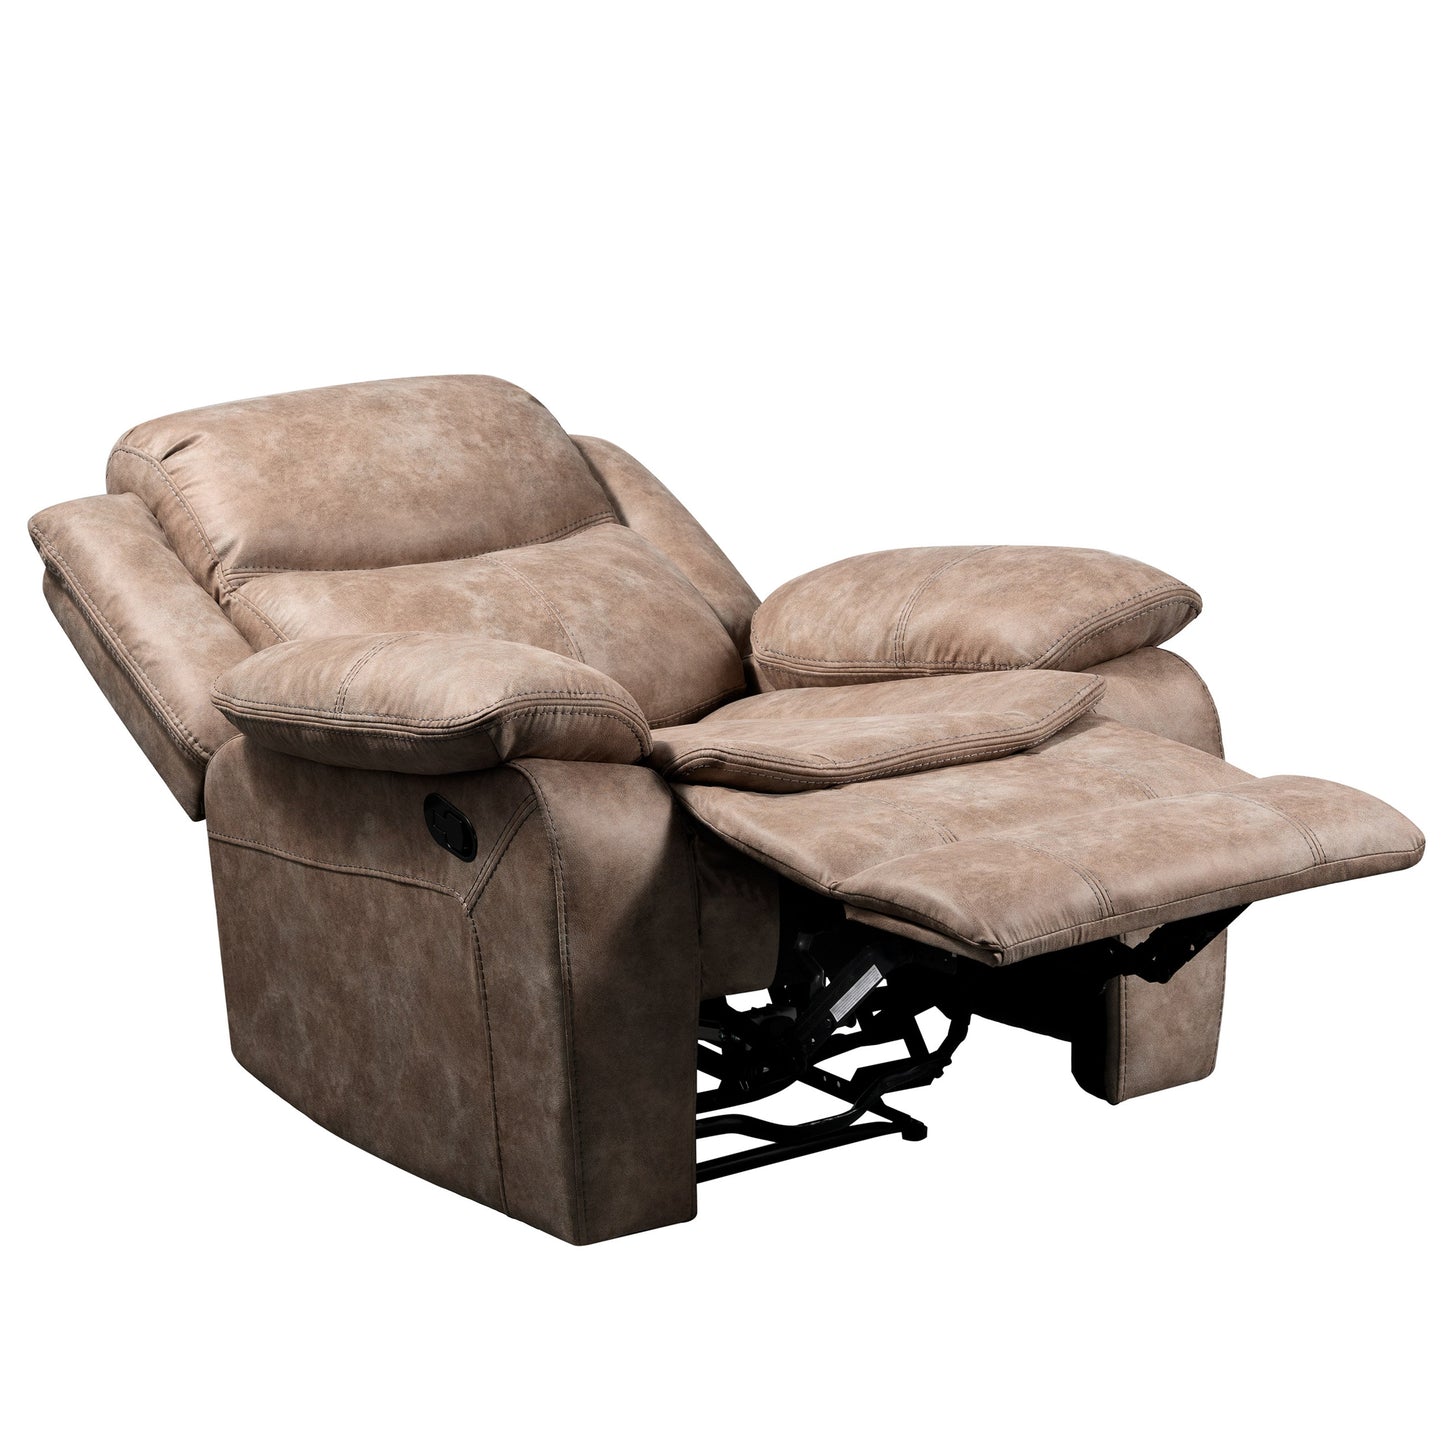 Ensley Faux Leather Finished Recliner in Sand Finish